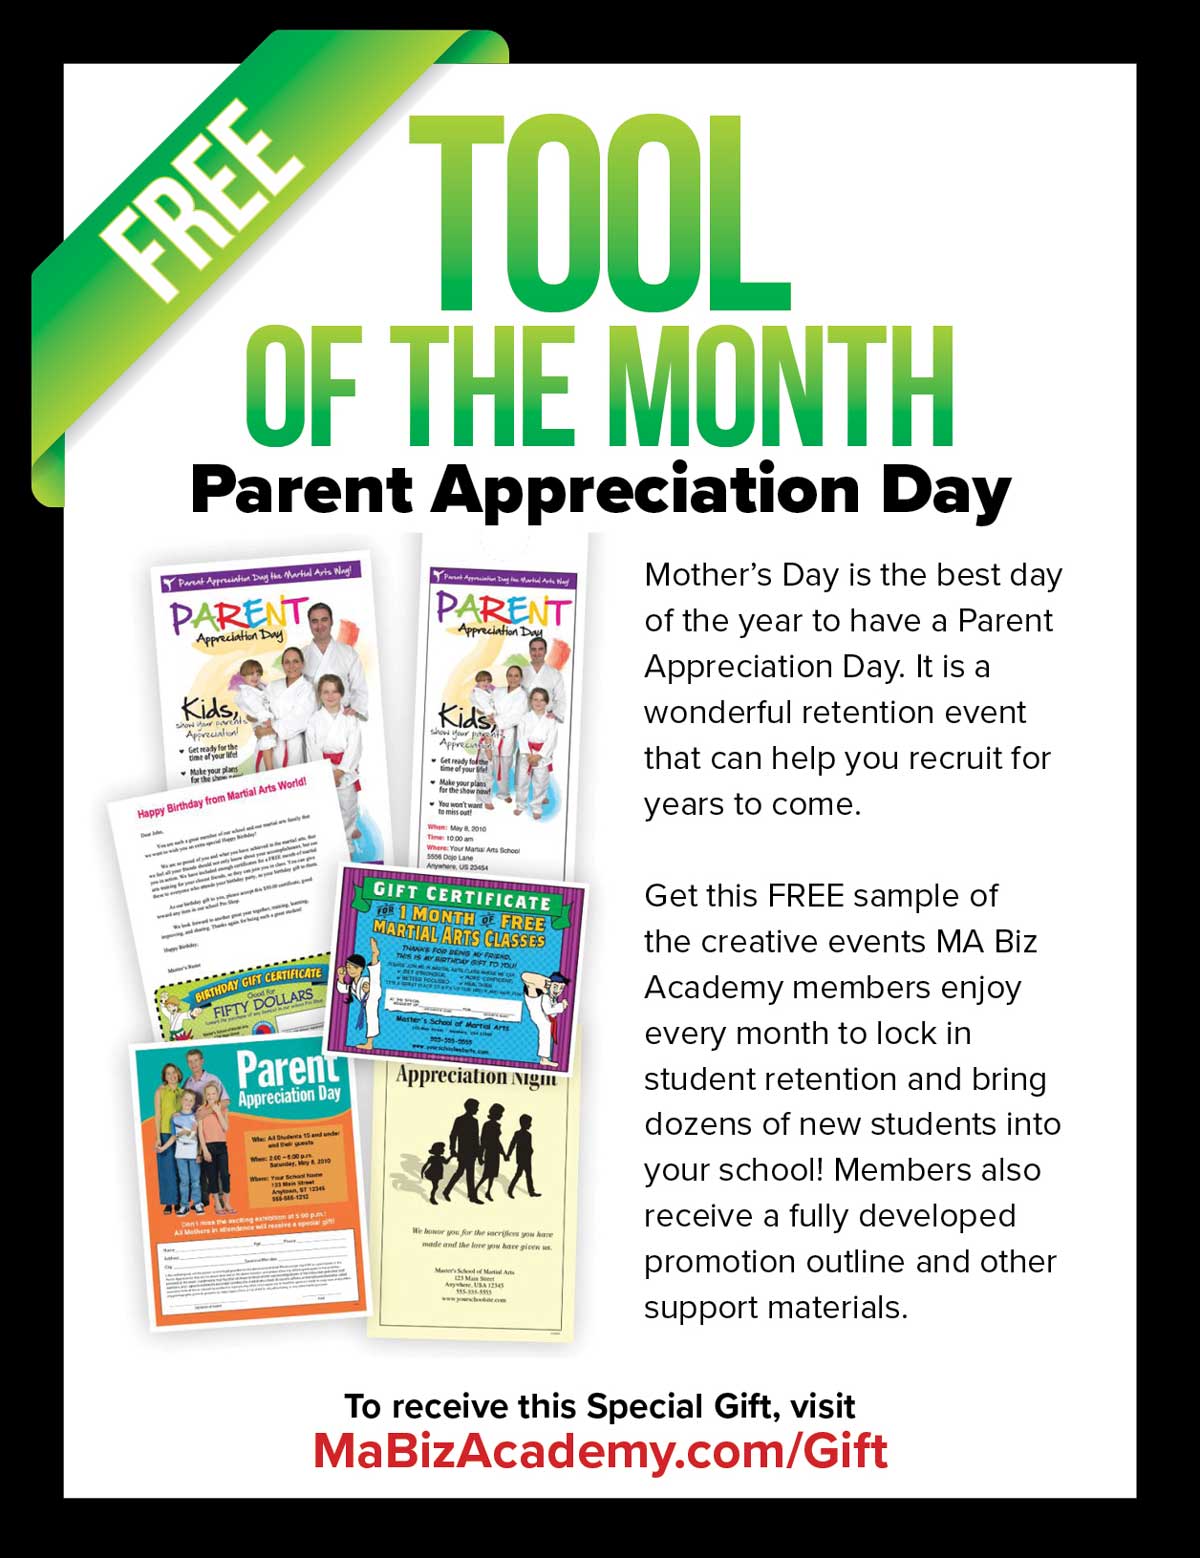 Parent appreciation tool of the month